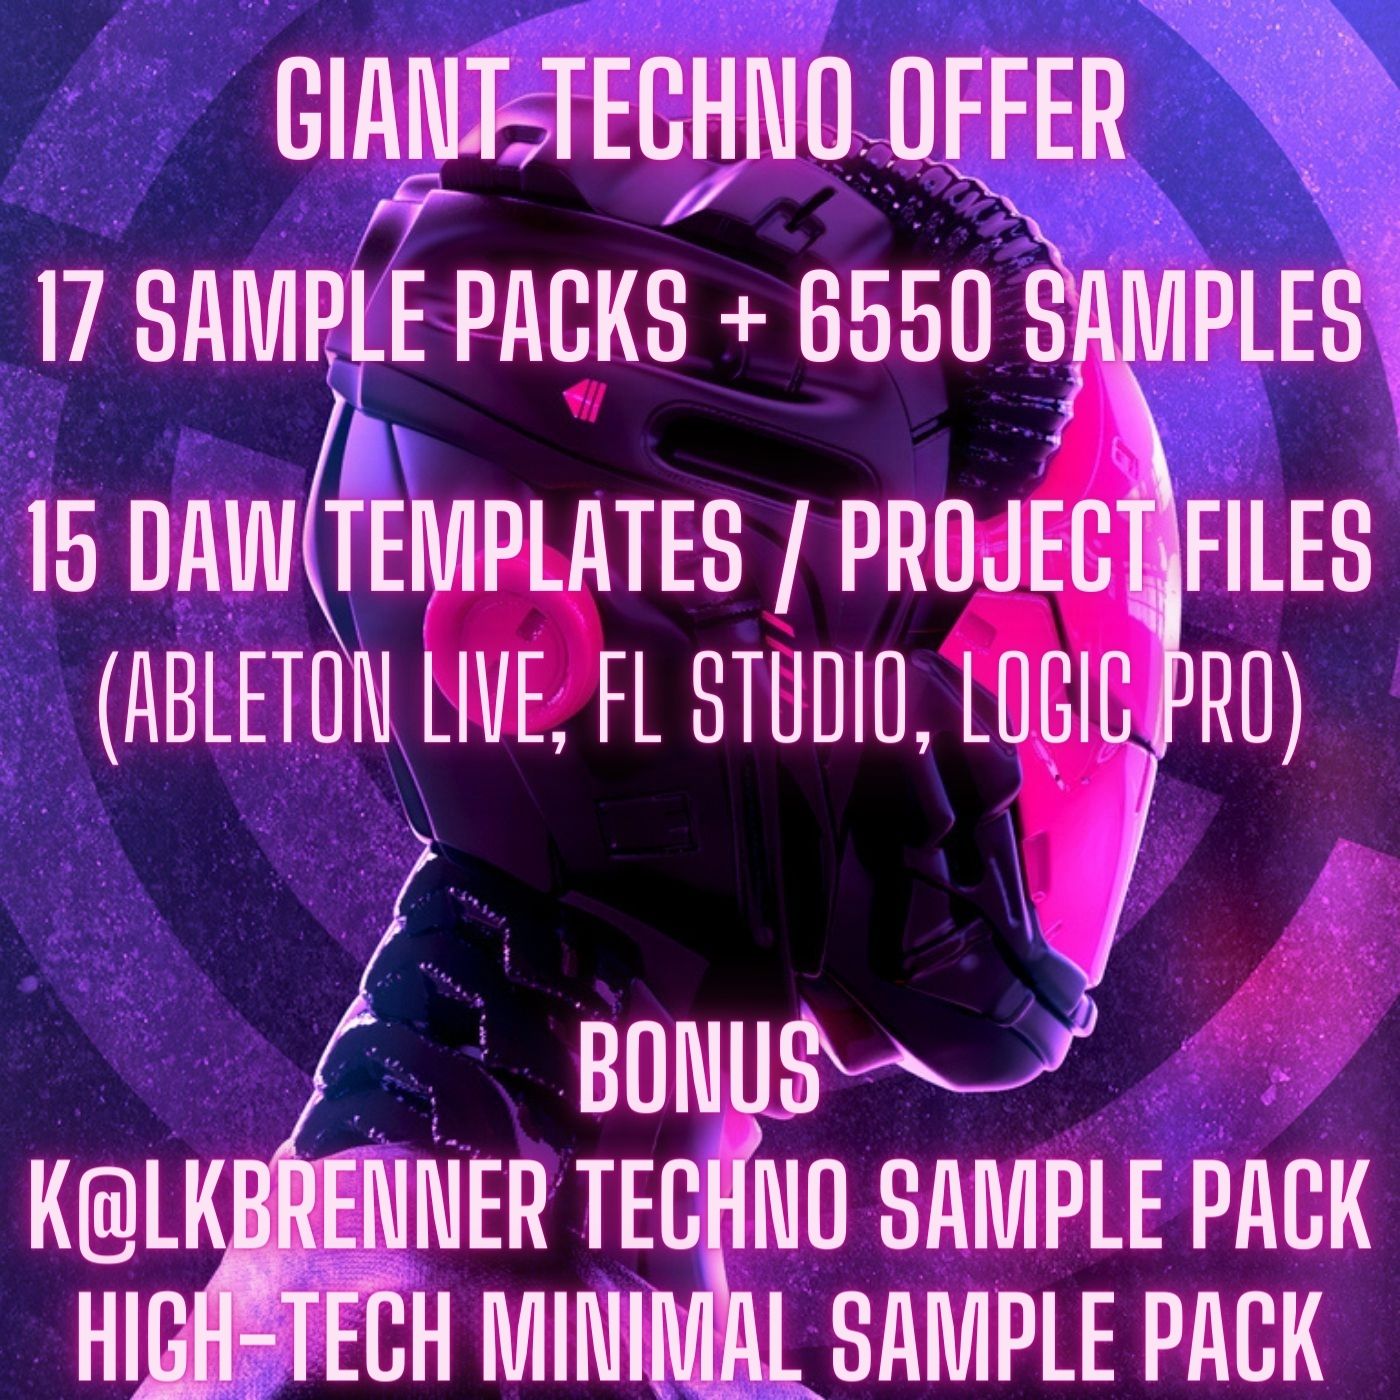 Sample pack offers